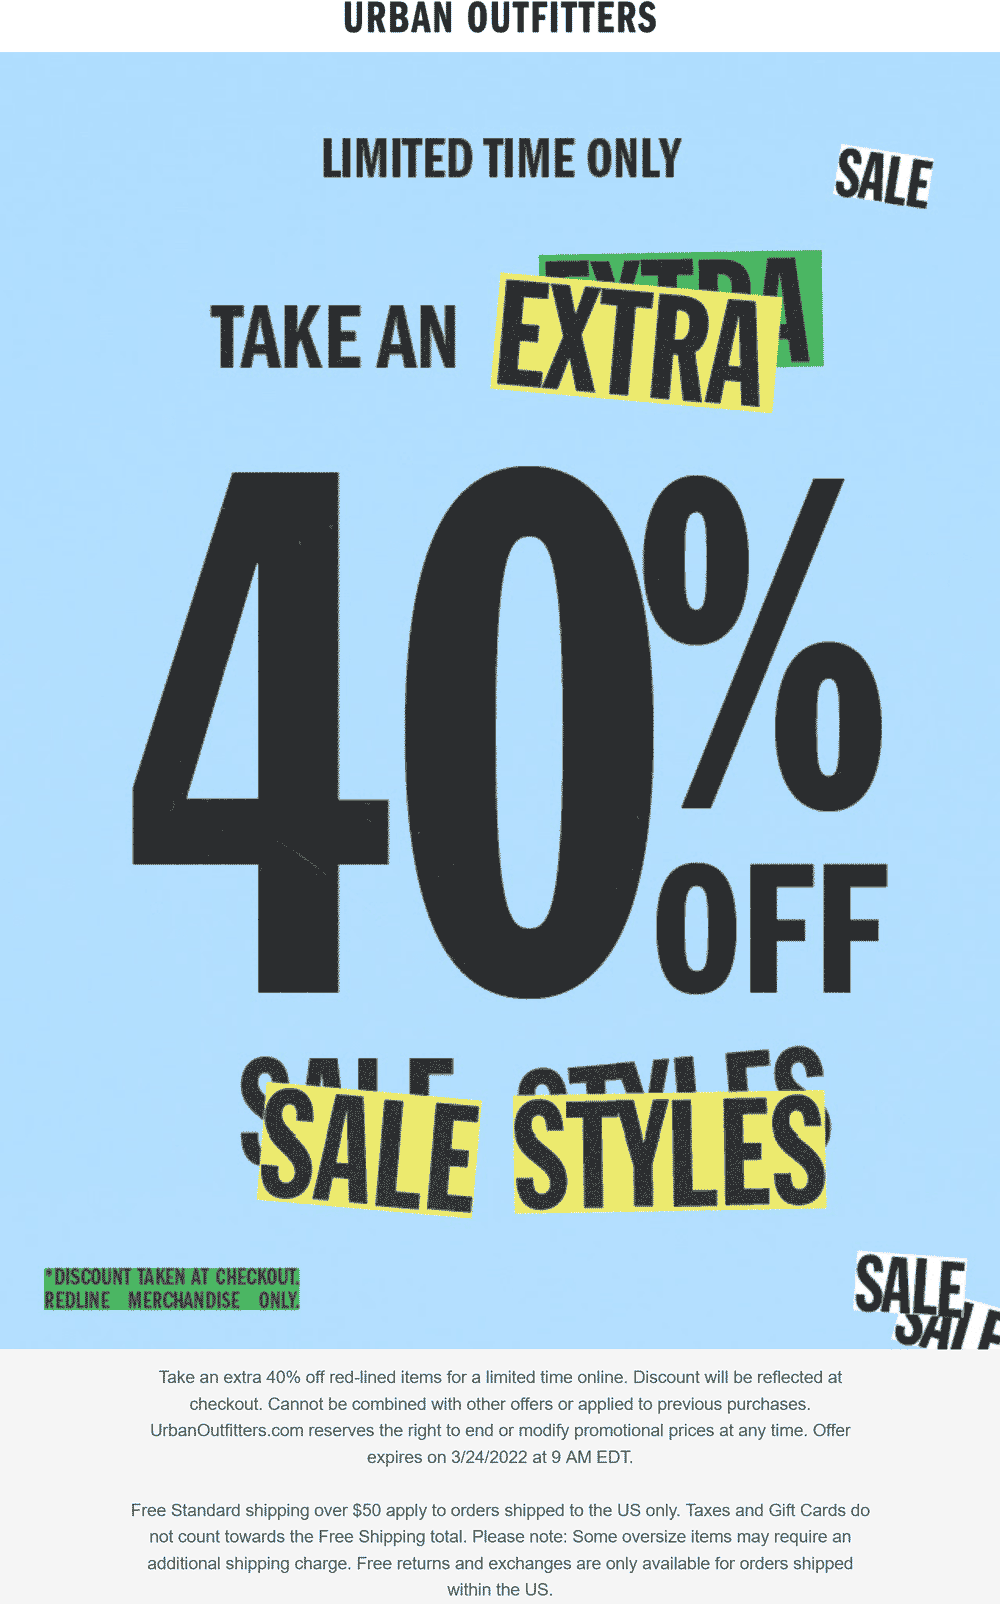 Urban Outfitters stores Coupon  Extra 40% off sale styles online at Urban Outfitters #urbanoutfitters 